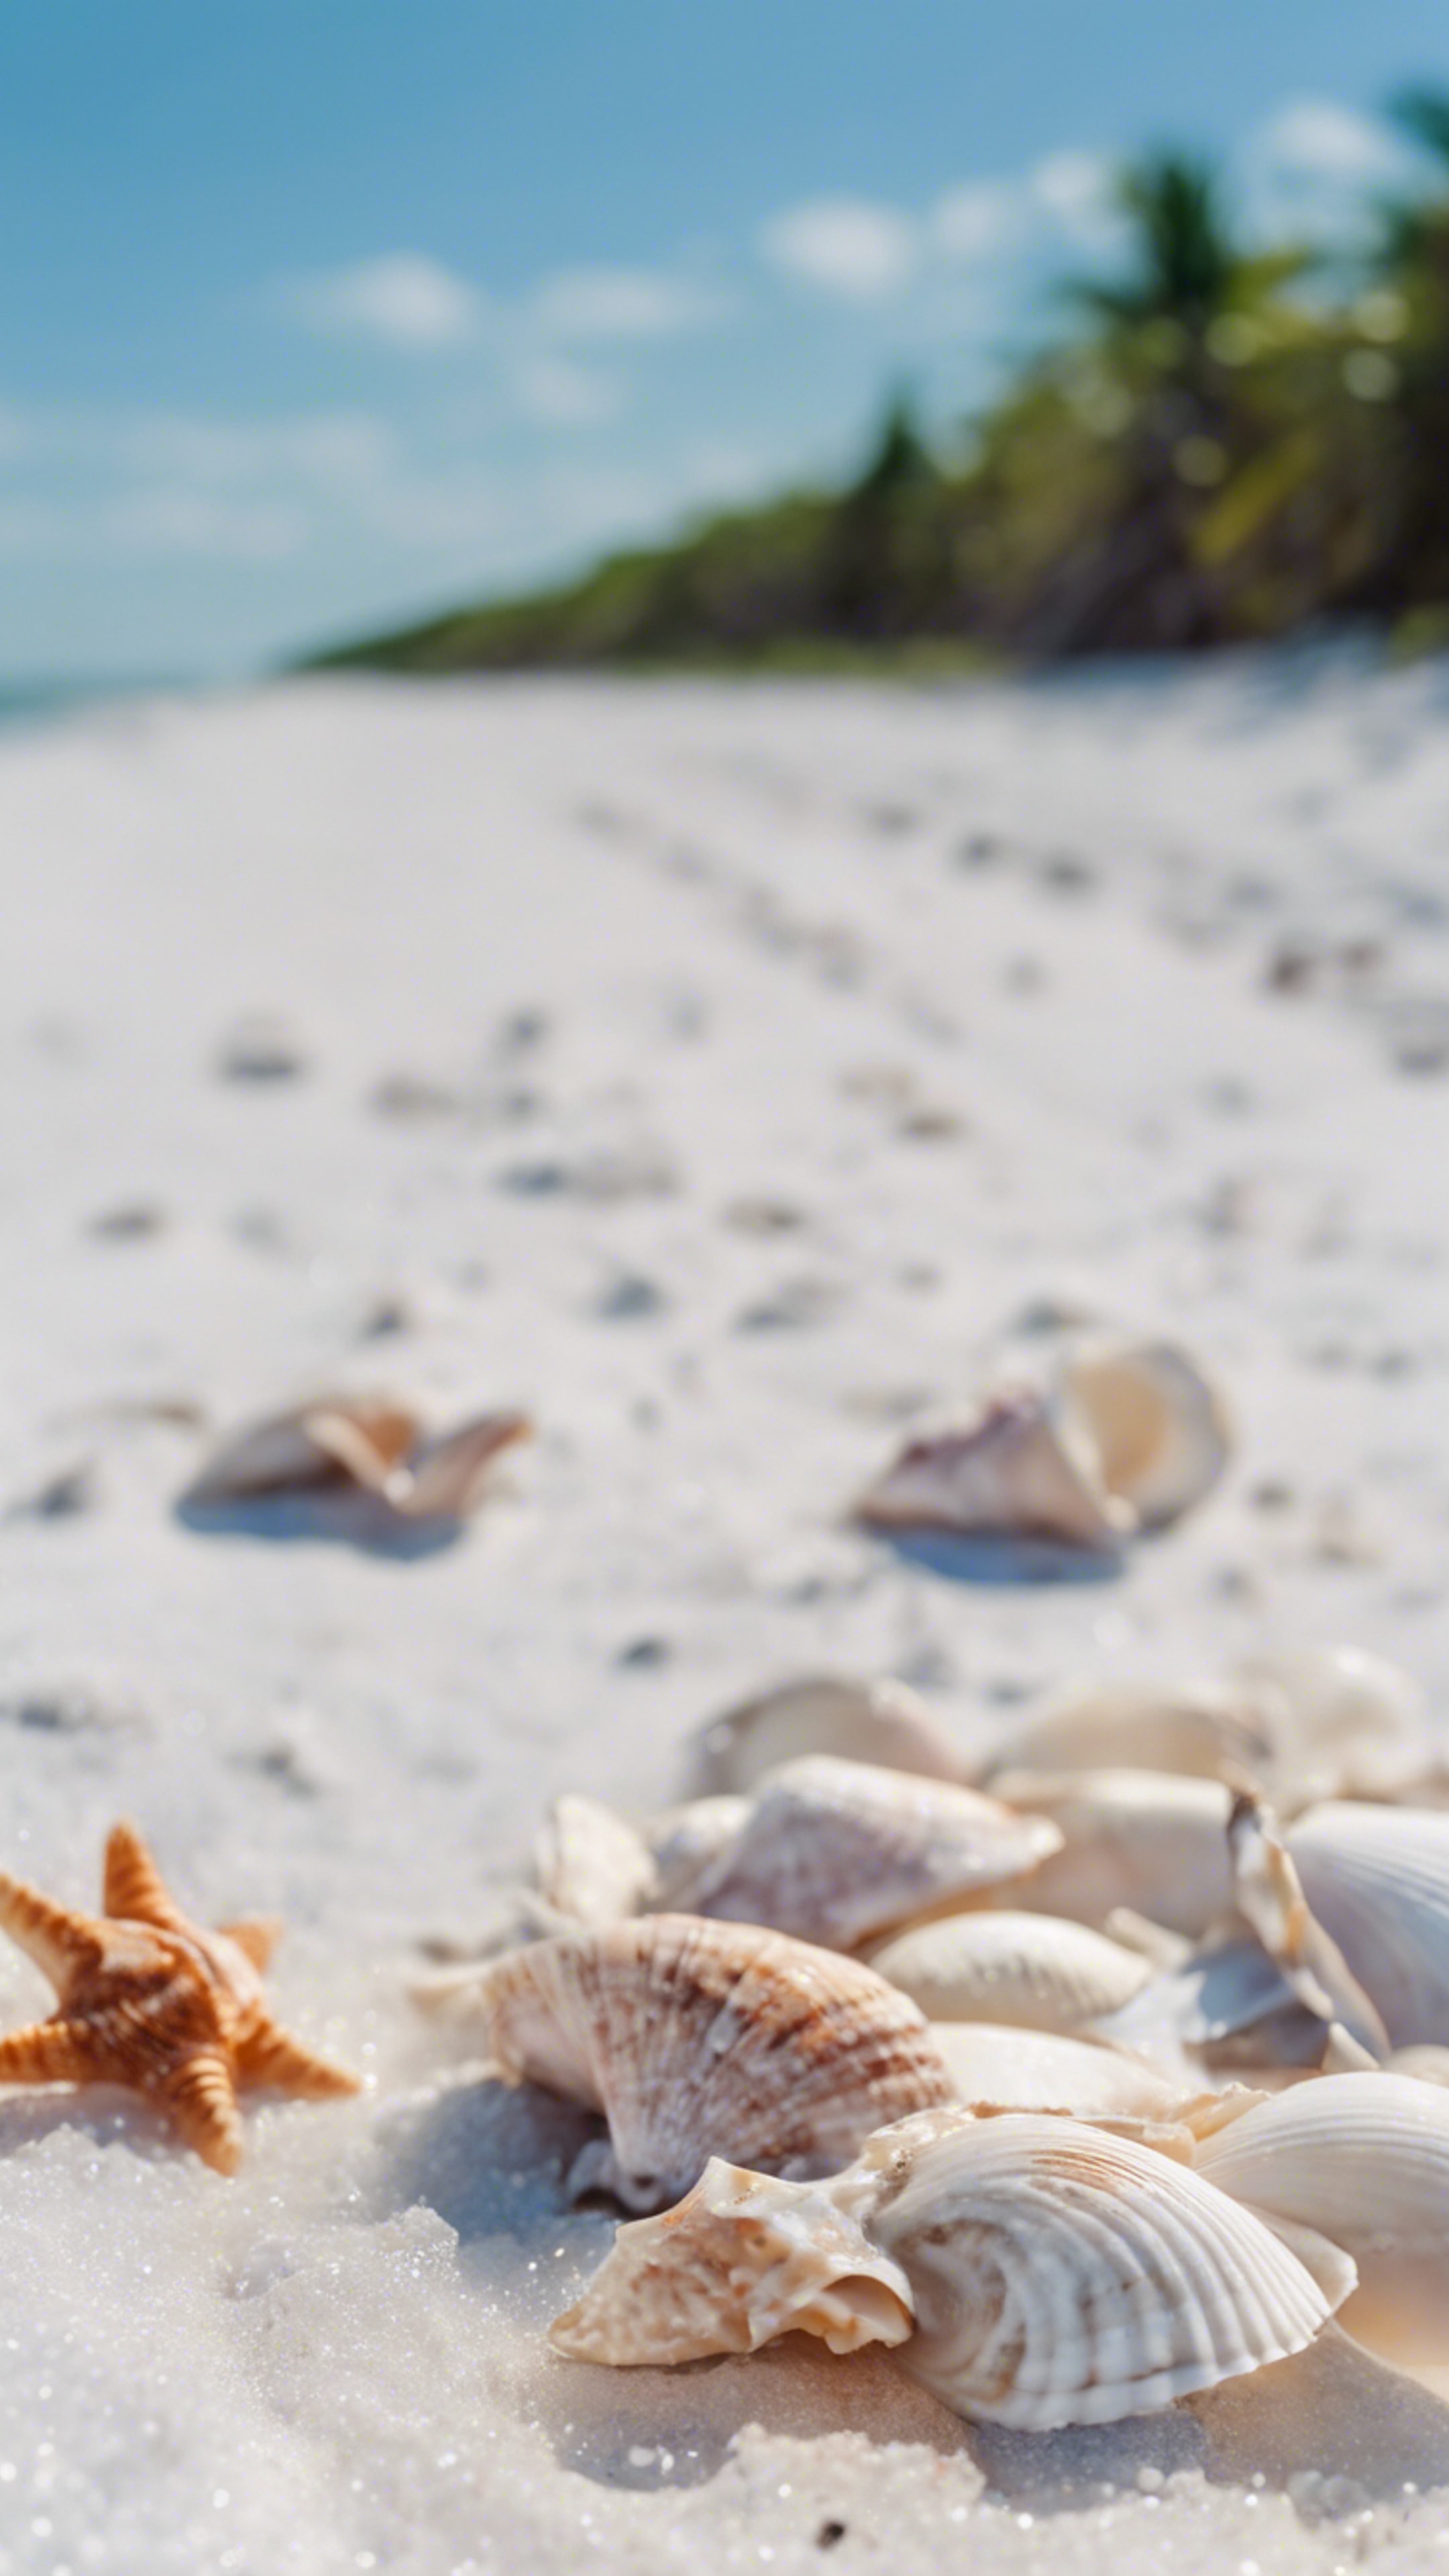 Seashells scattered along the pure white sandy beaches of Sanibel Island under clear, blue skies. Sfondo[1c53aef66a12437c830d]